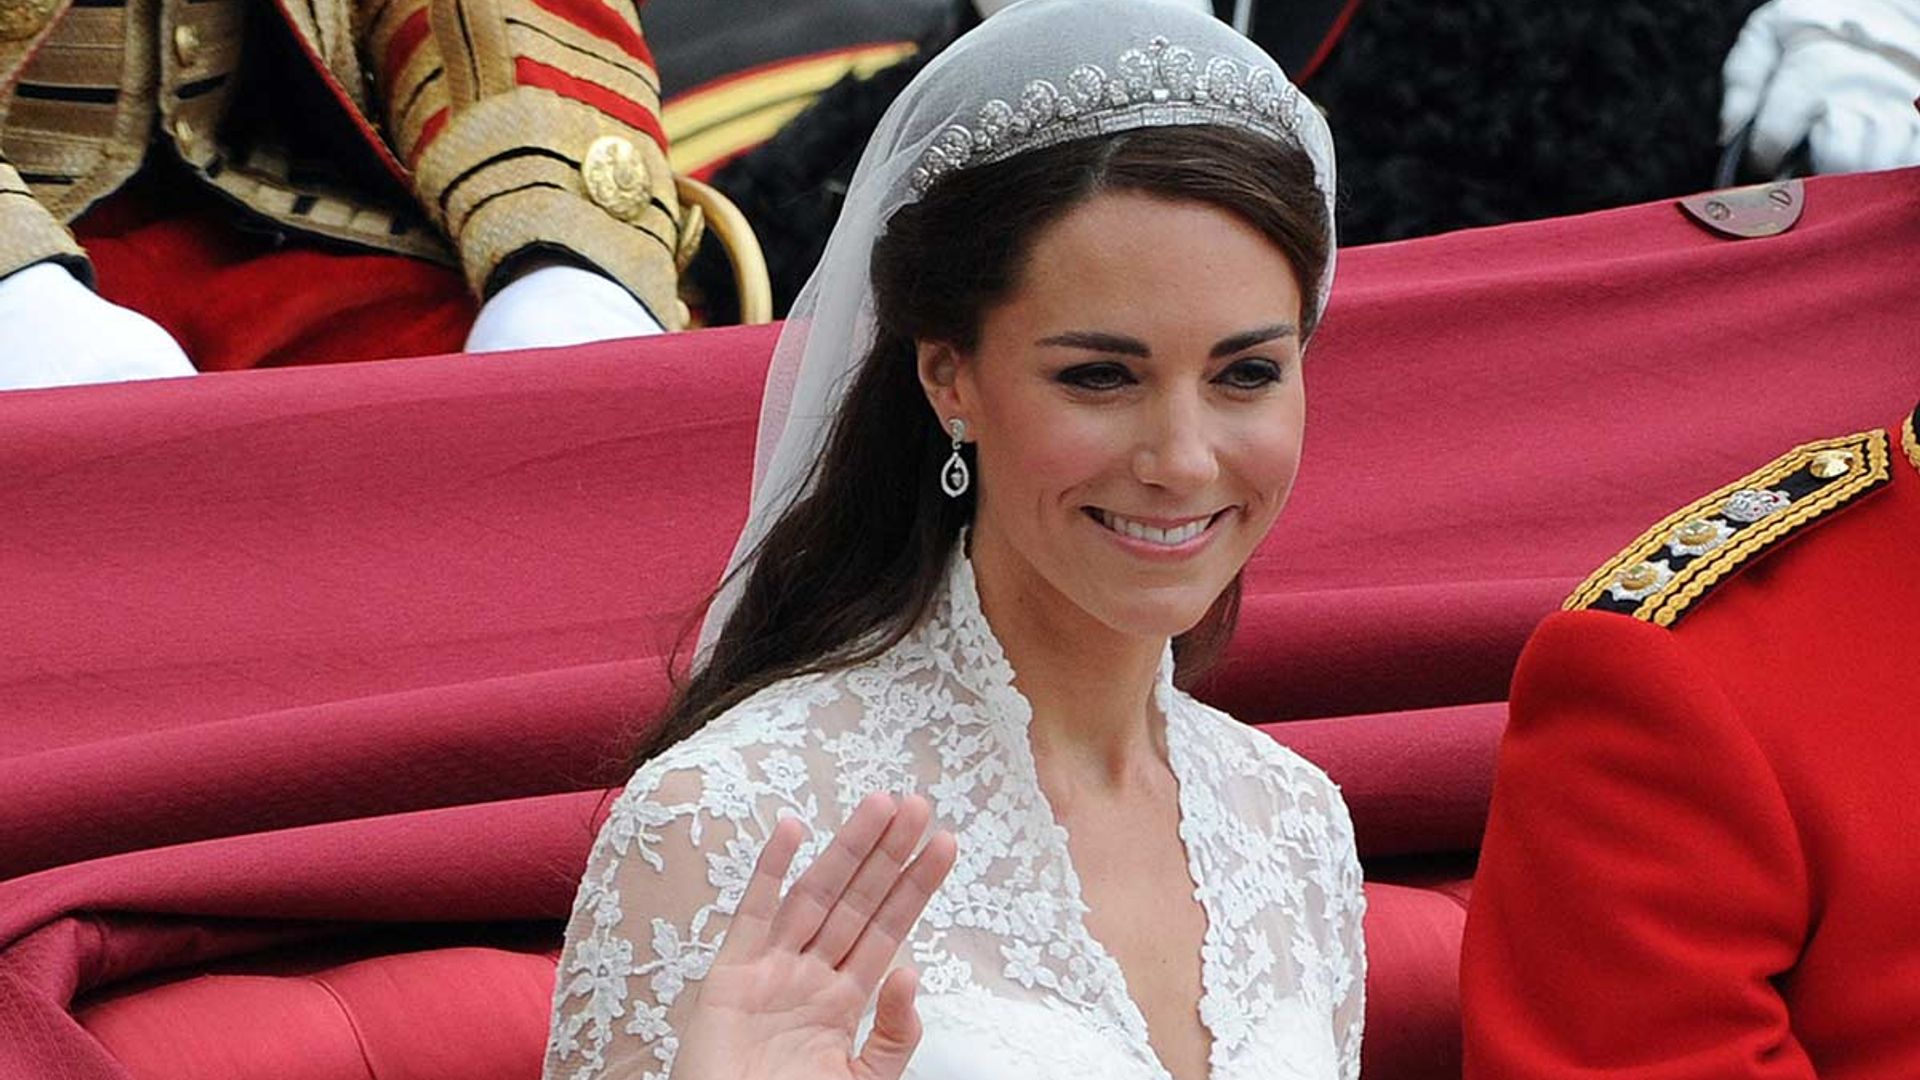 Why Kate Middleton's royal wedding beauty look was groundbreaking